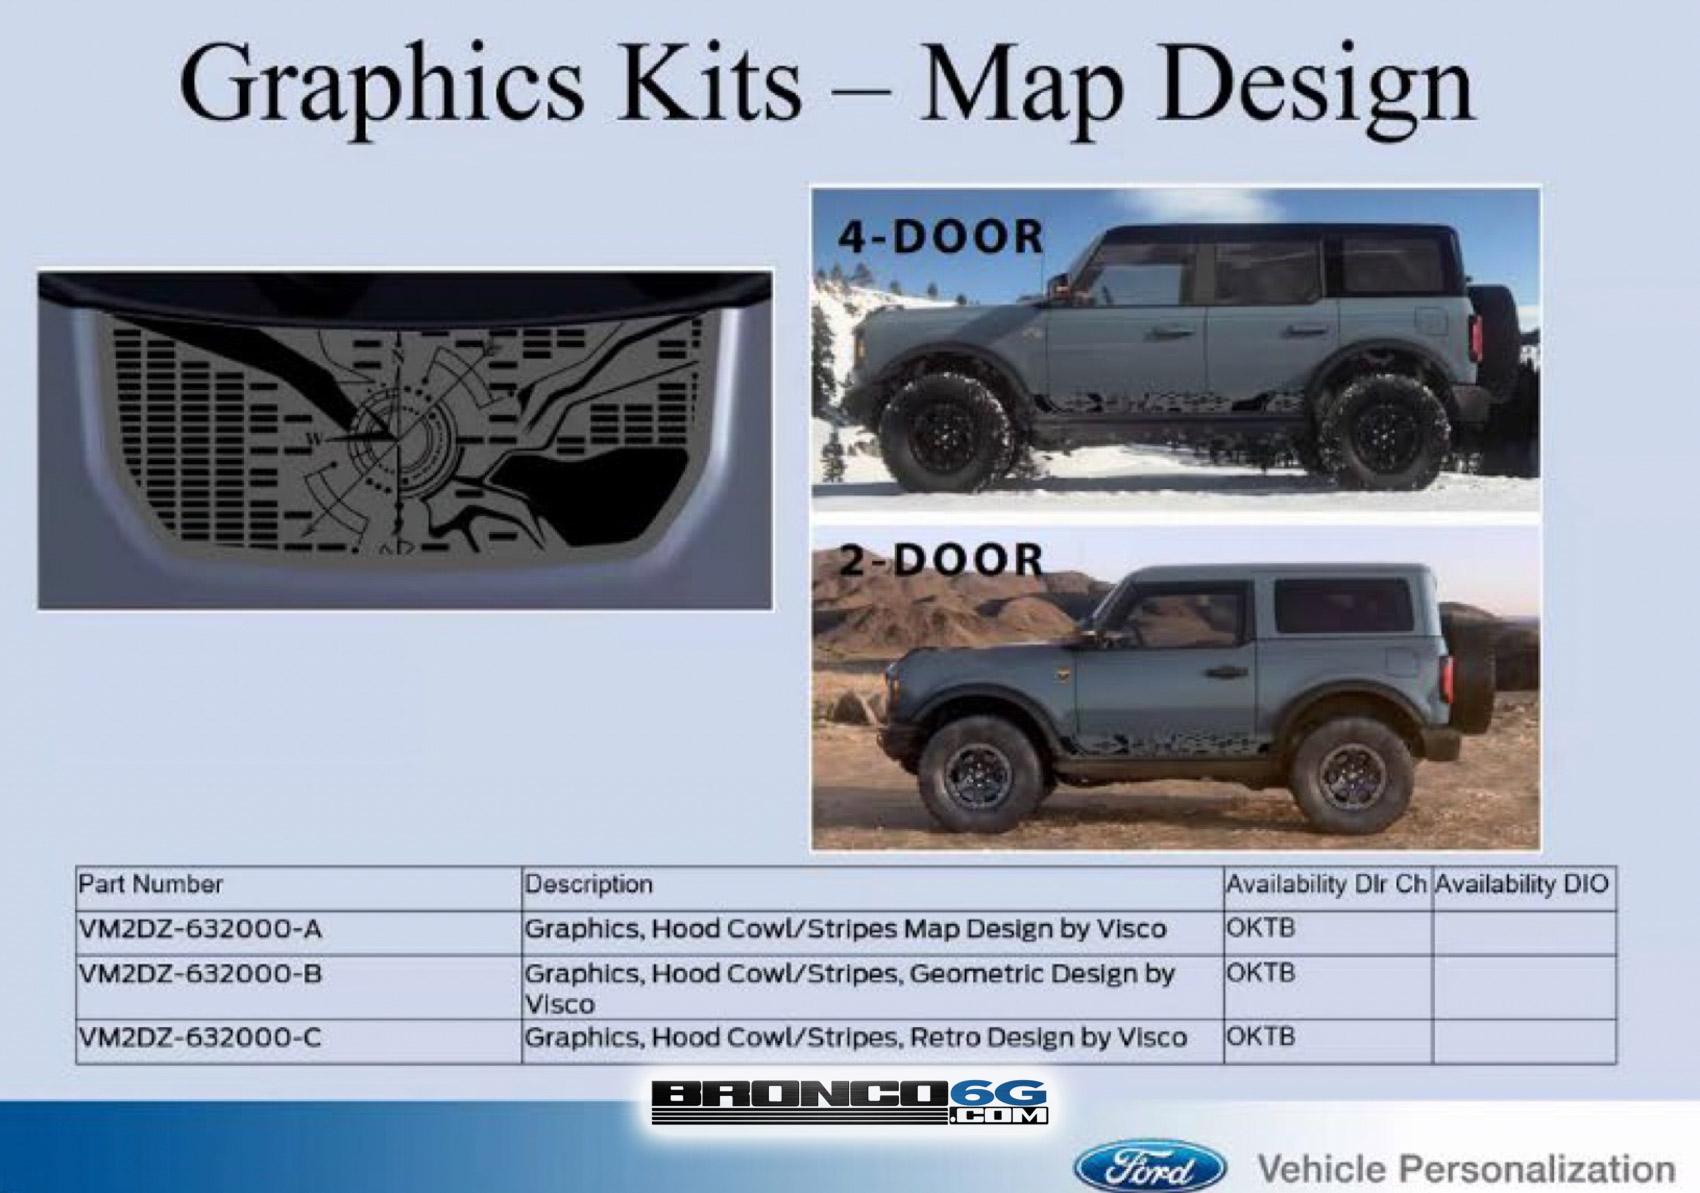 2021 Bronco Graphics Kits Map Design - Ford Performance OEM factory accessory.jpg